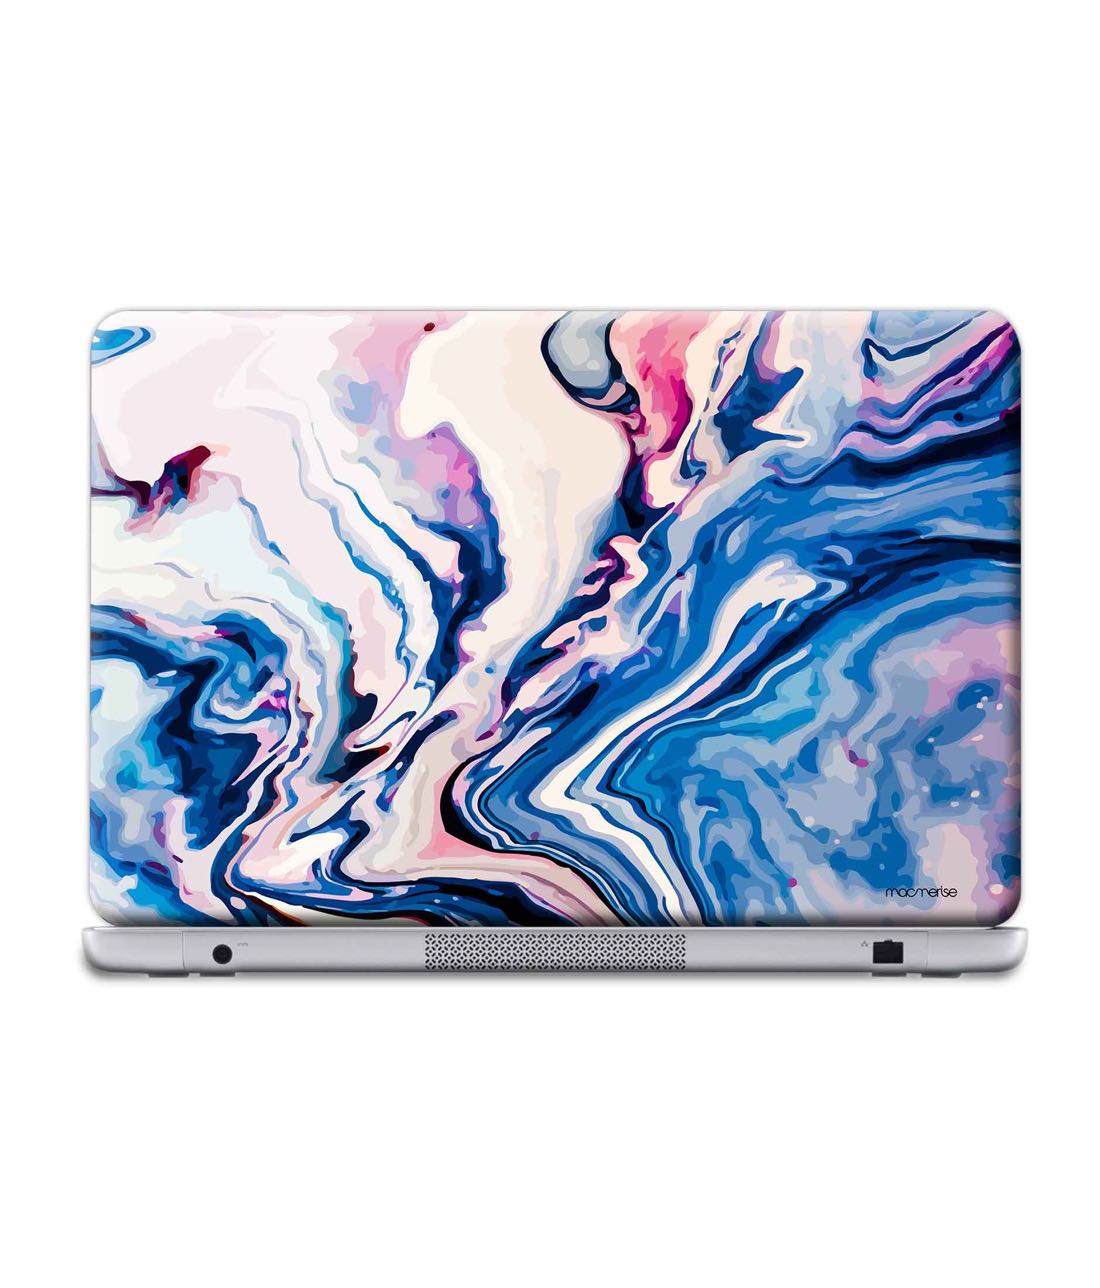 Buy Liquid Funk Pinkblue Macmerise Skins For Laptop Dell Inspiron 15 3000 Series Online 